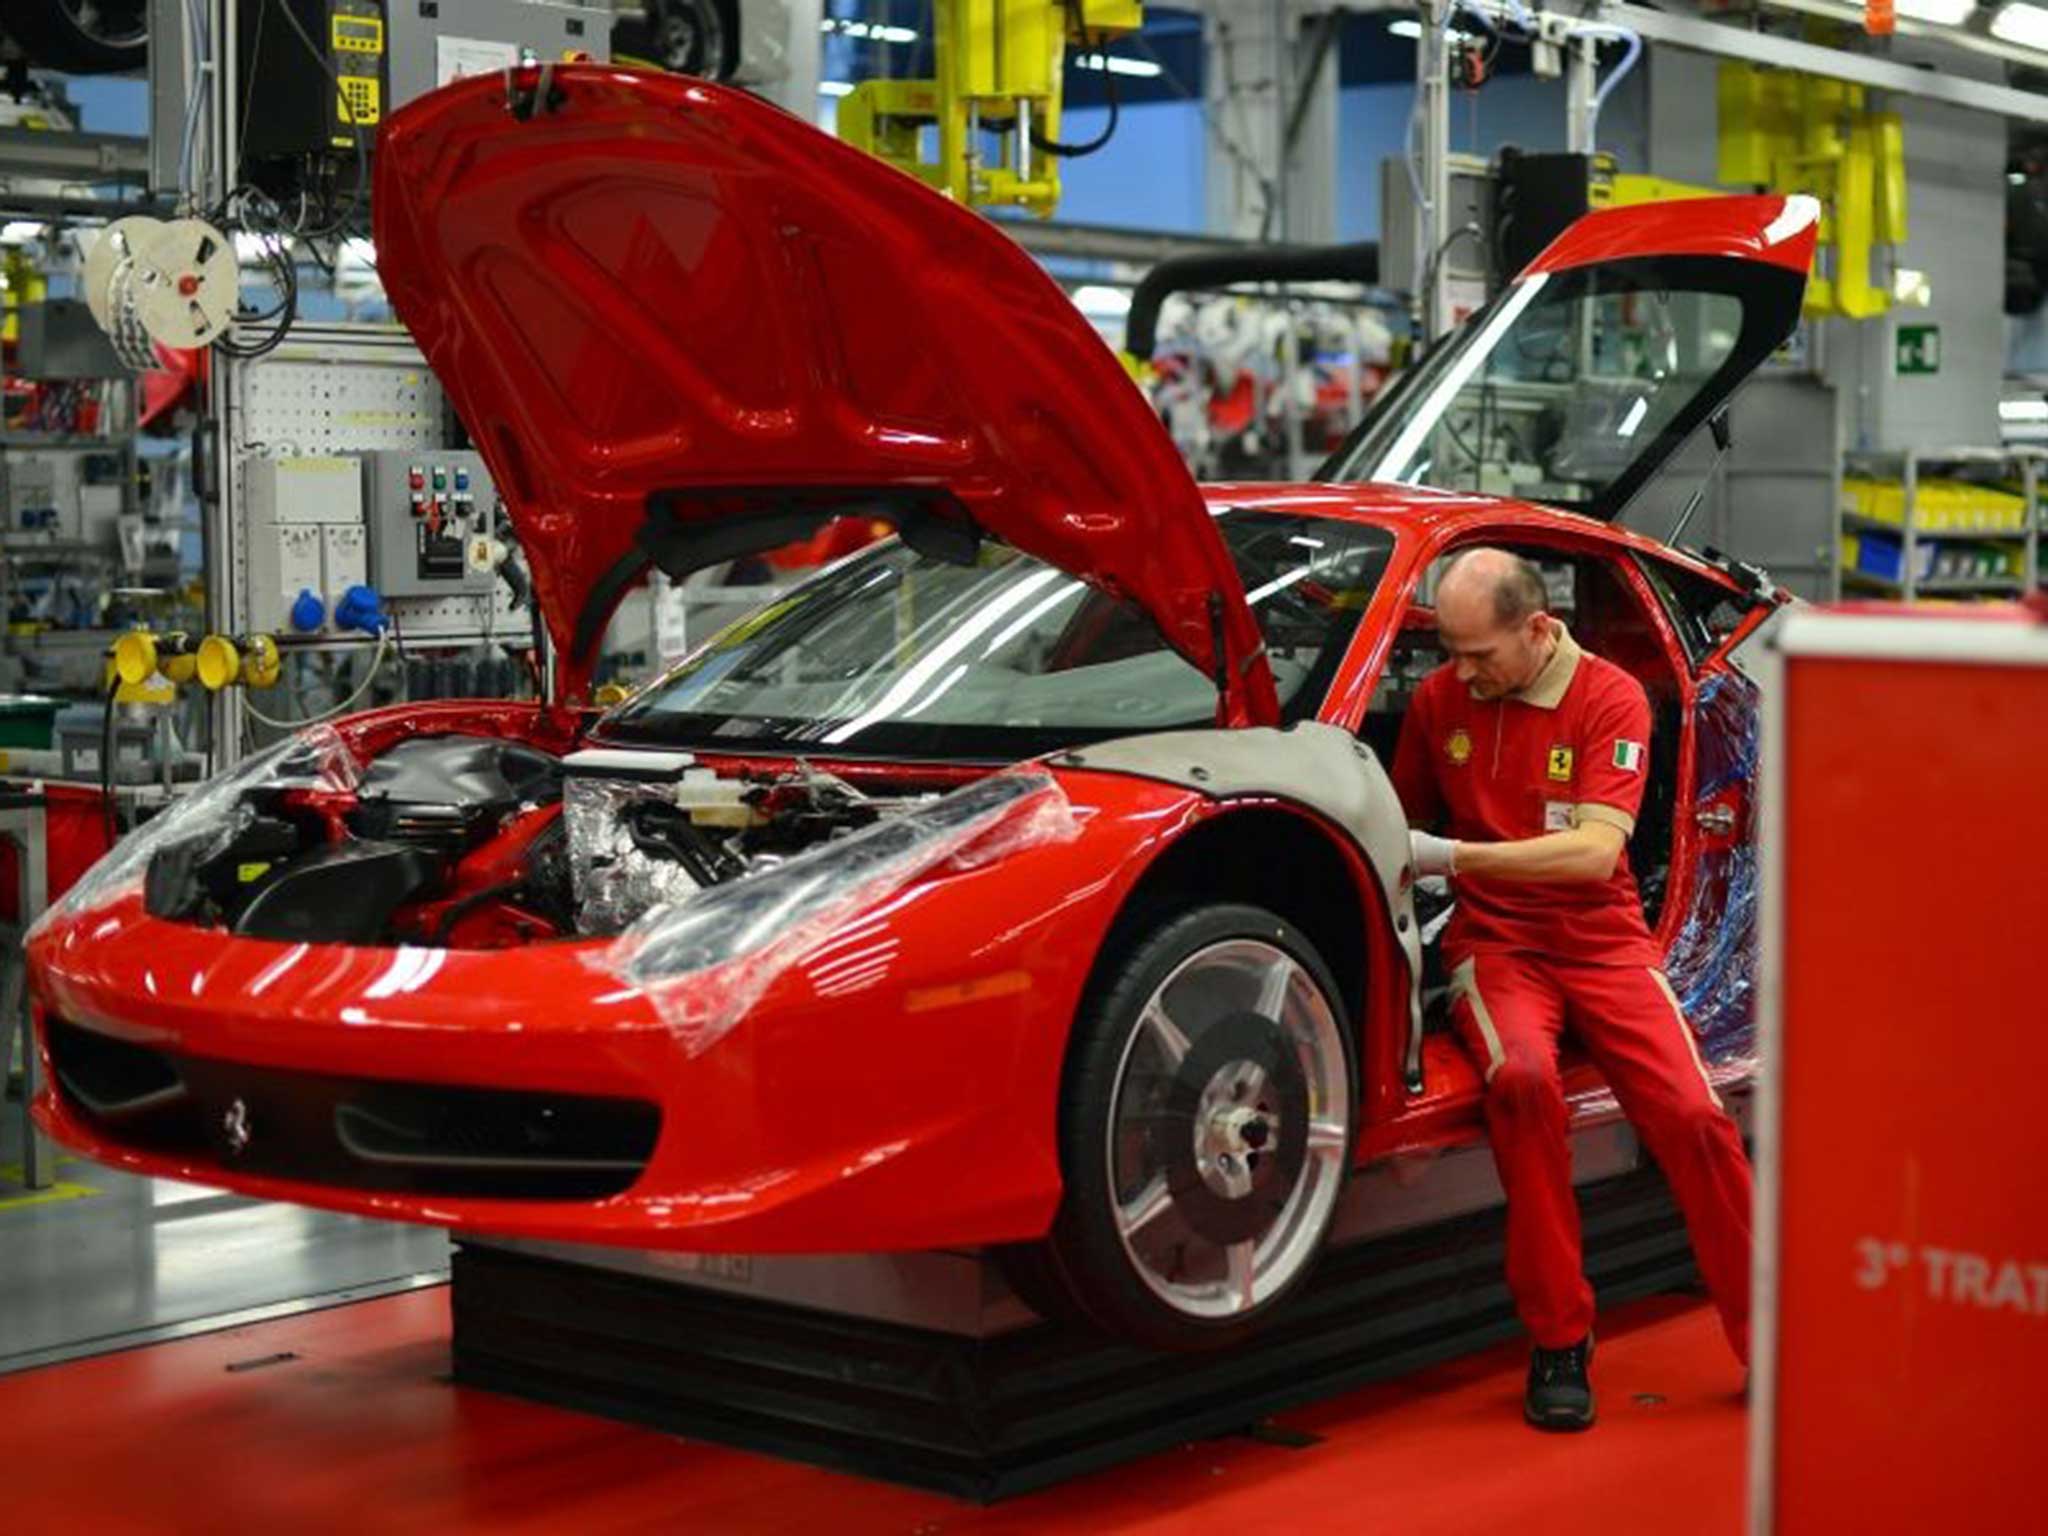 The Ferrari factory in Maranello churns out cars whose high-end credentials could be diluted by the diversification championed by chairman Sergio Marchionne